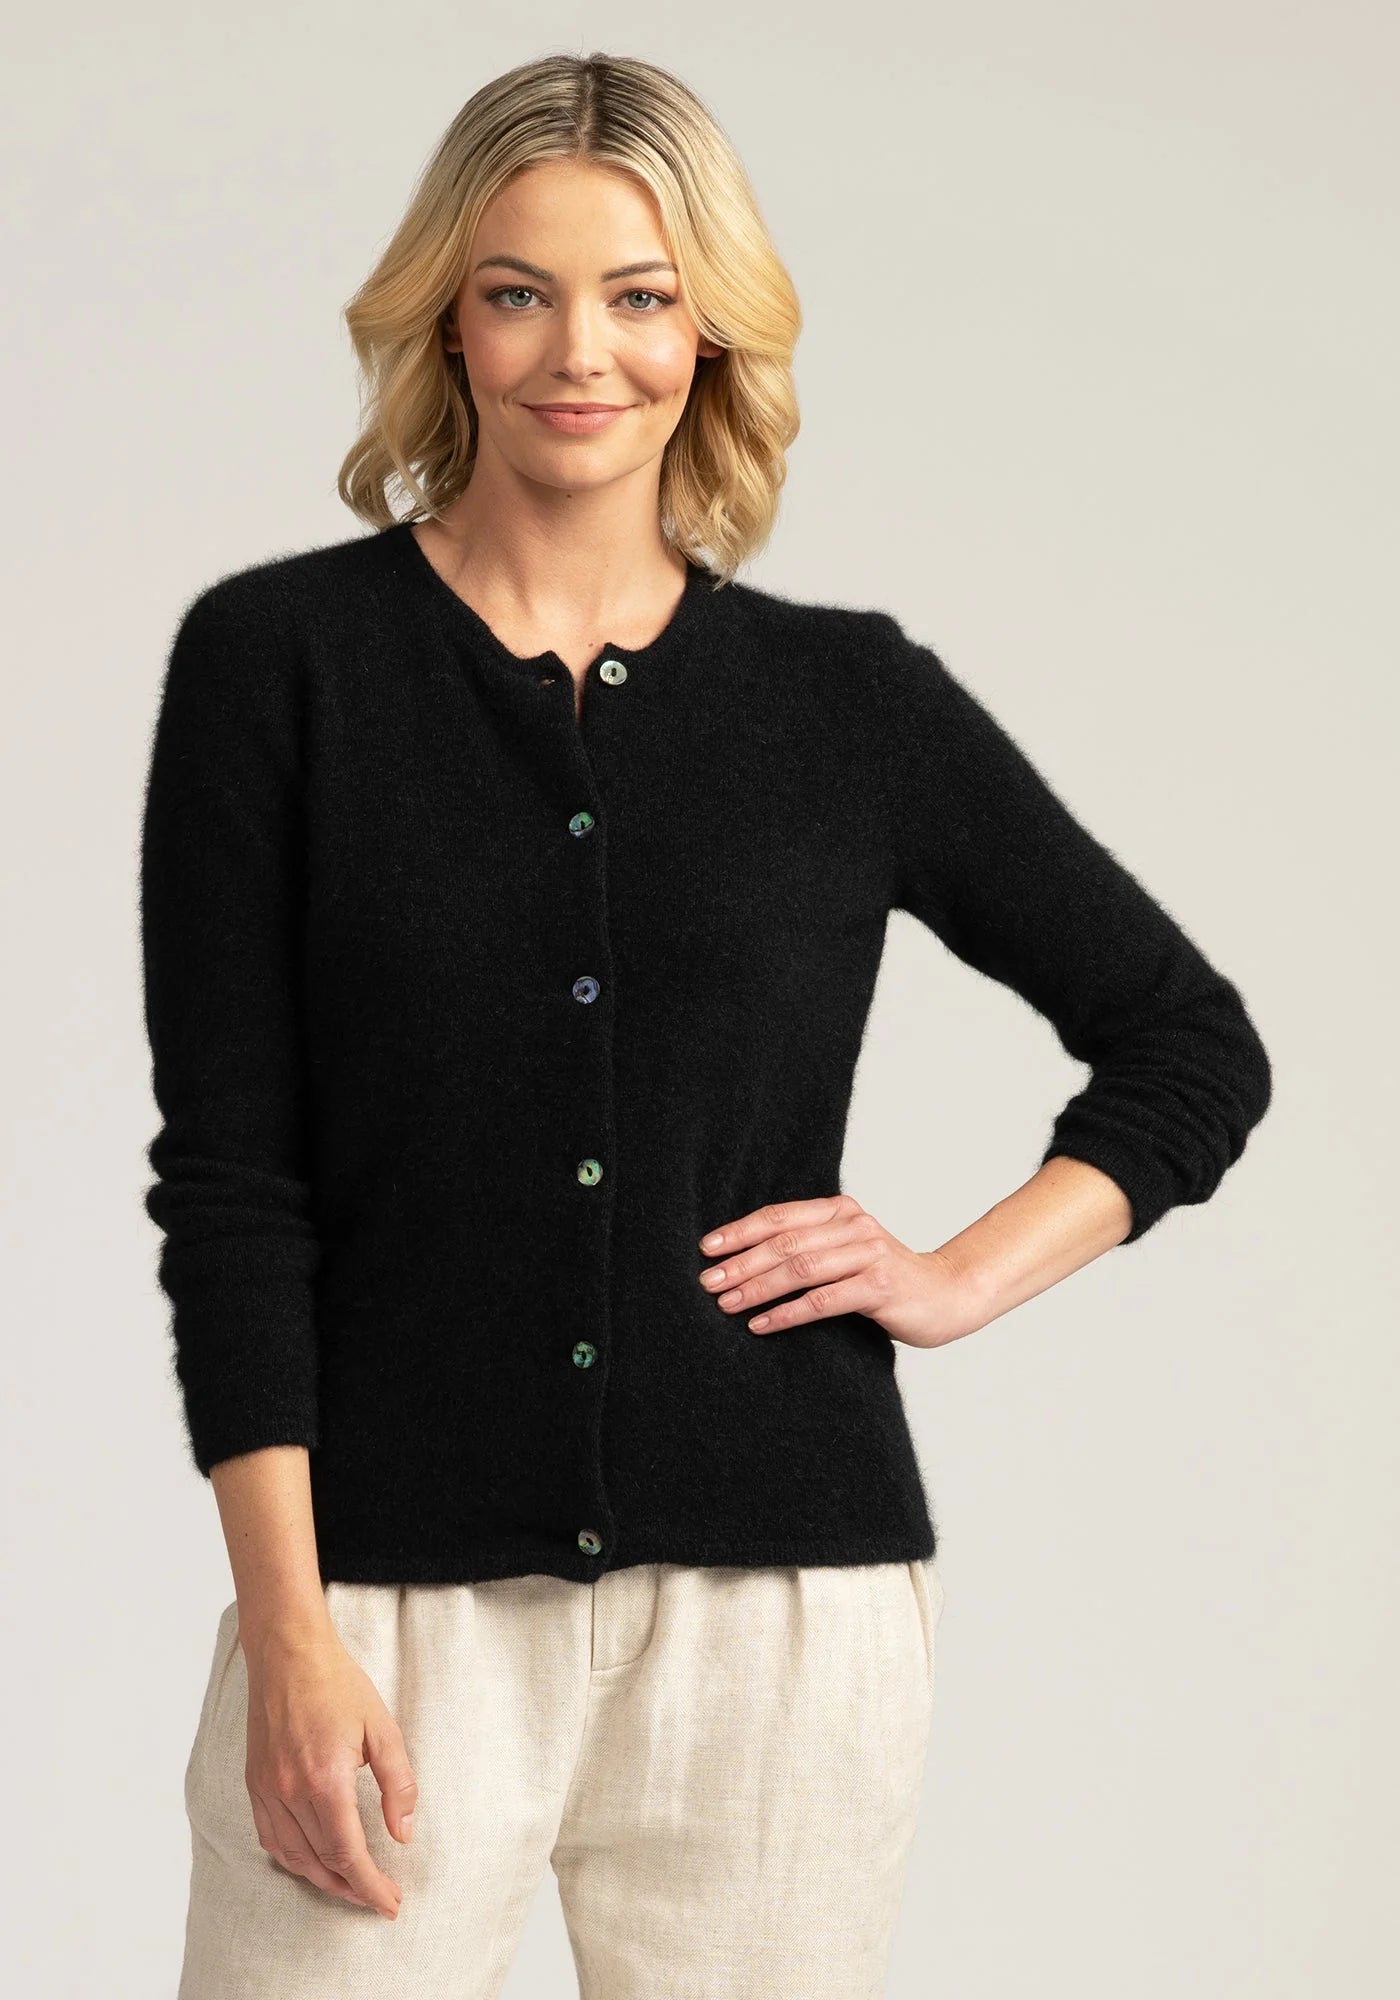 "Discover the perfect blend of comfort and class in our black merino wool cardigan. Button up for timeless style."